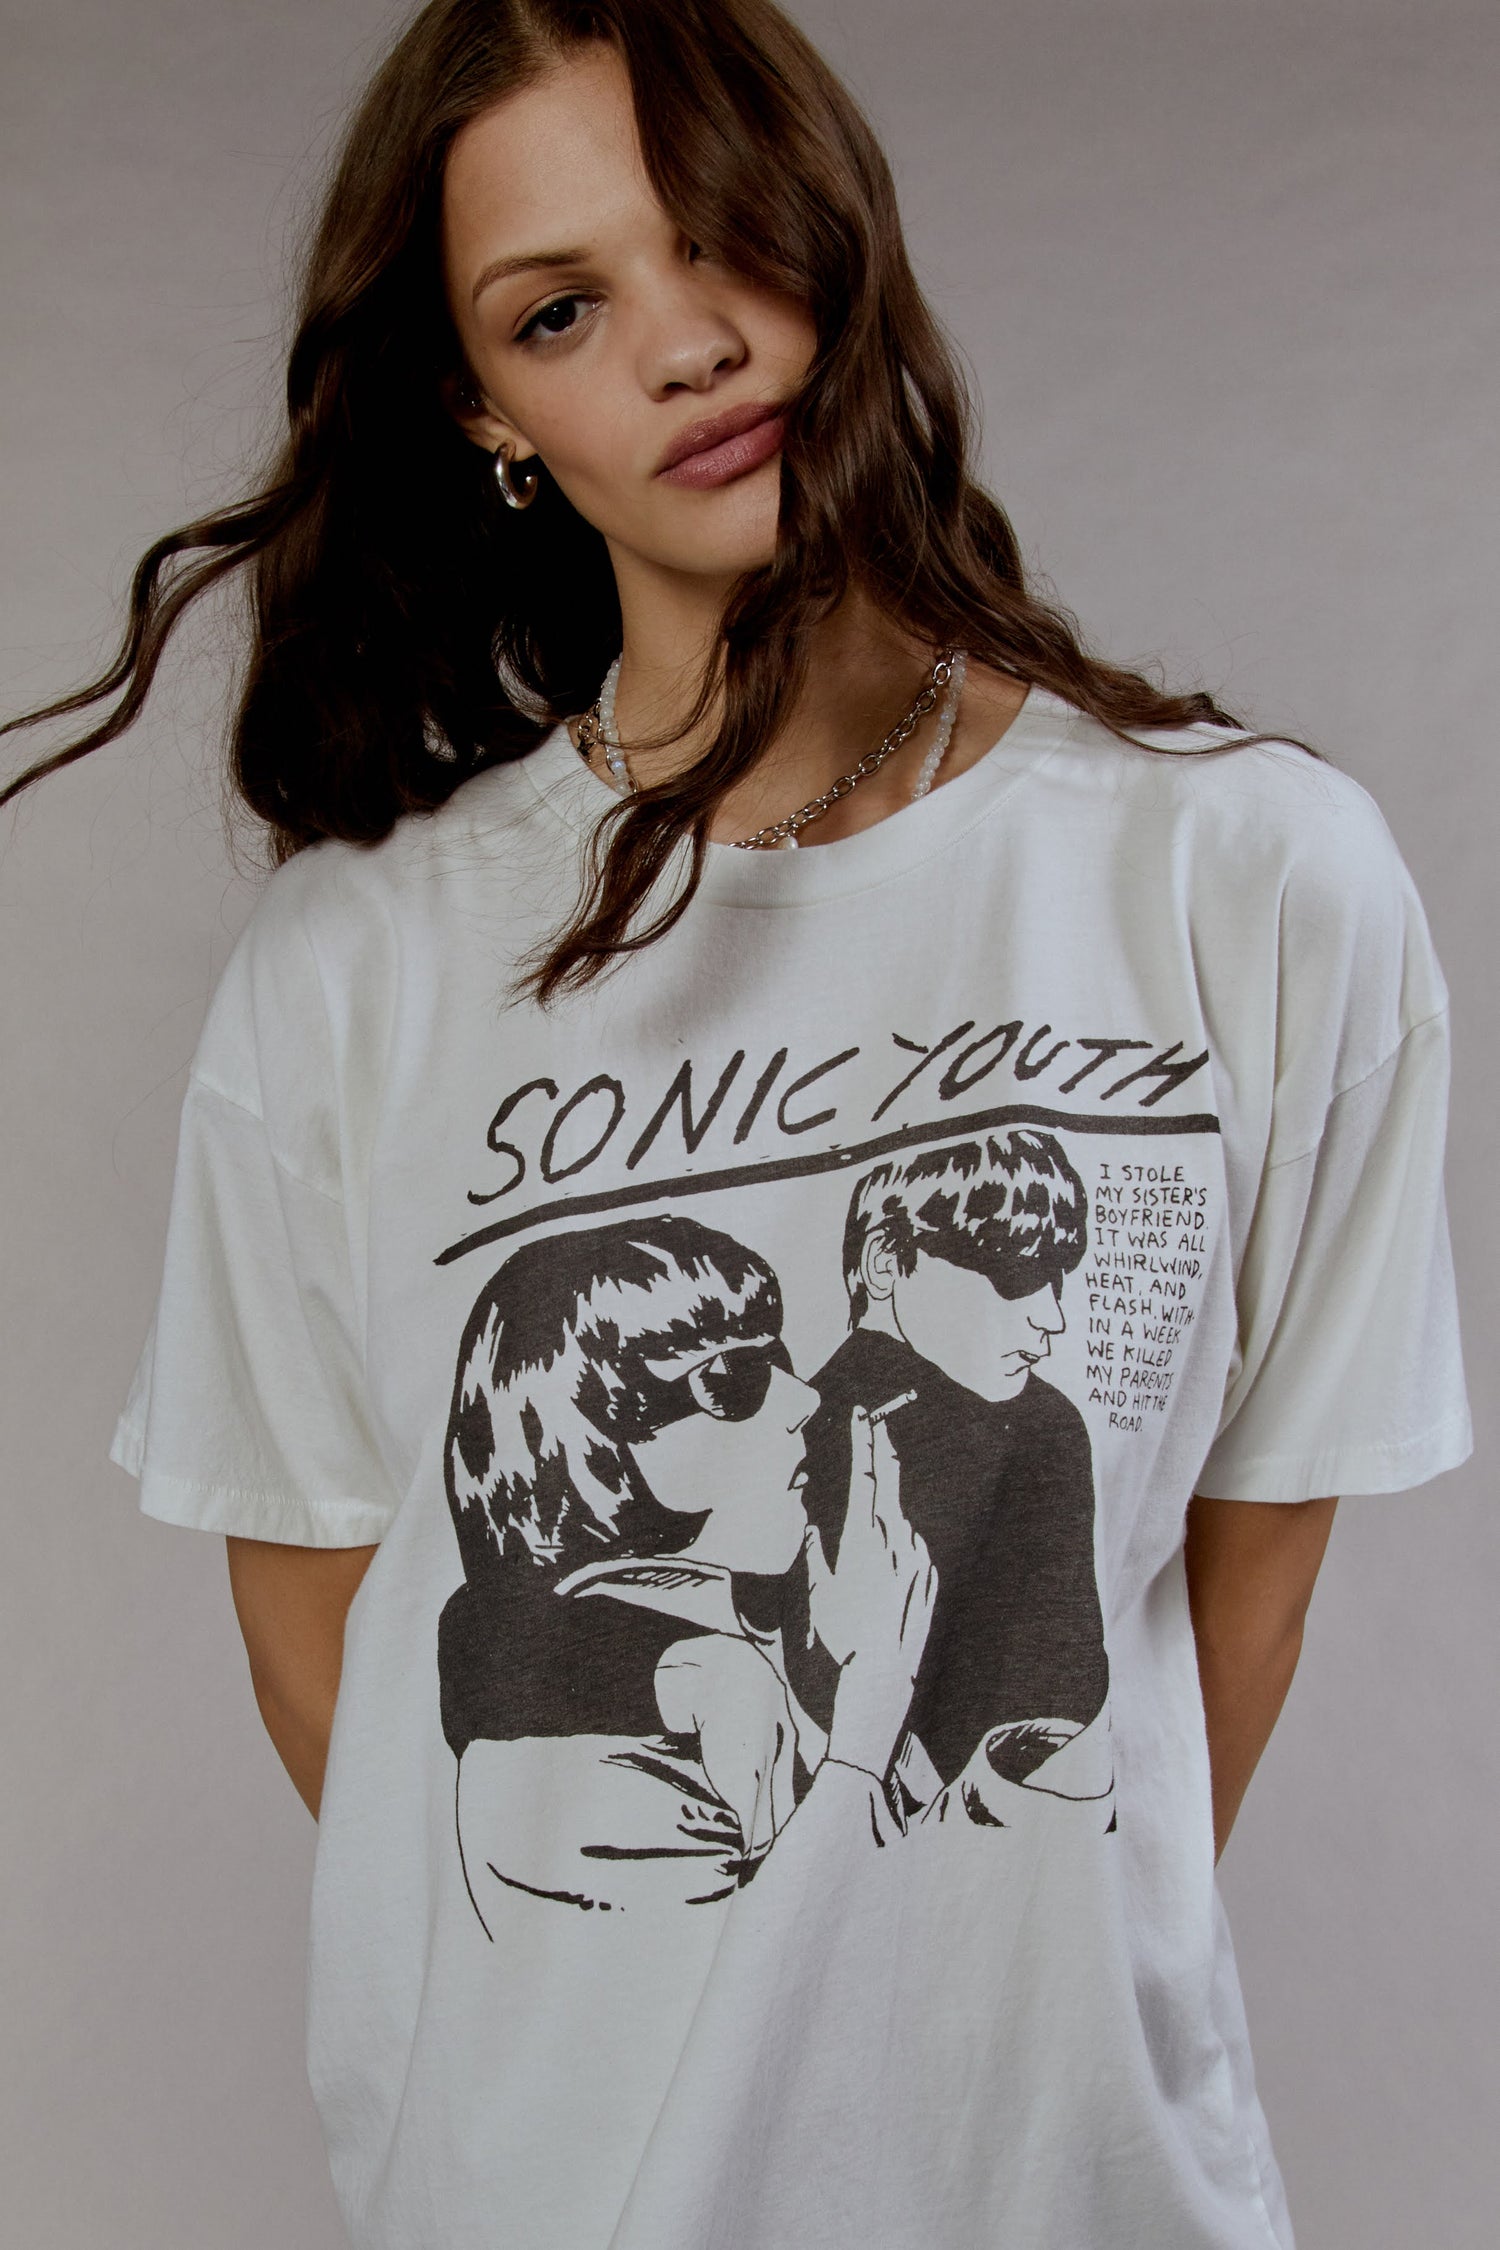 sonic youth oversized white tee